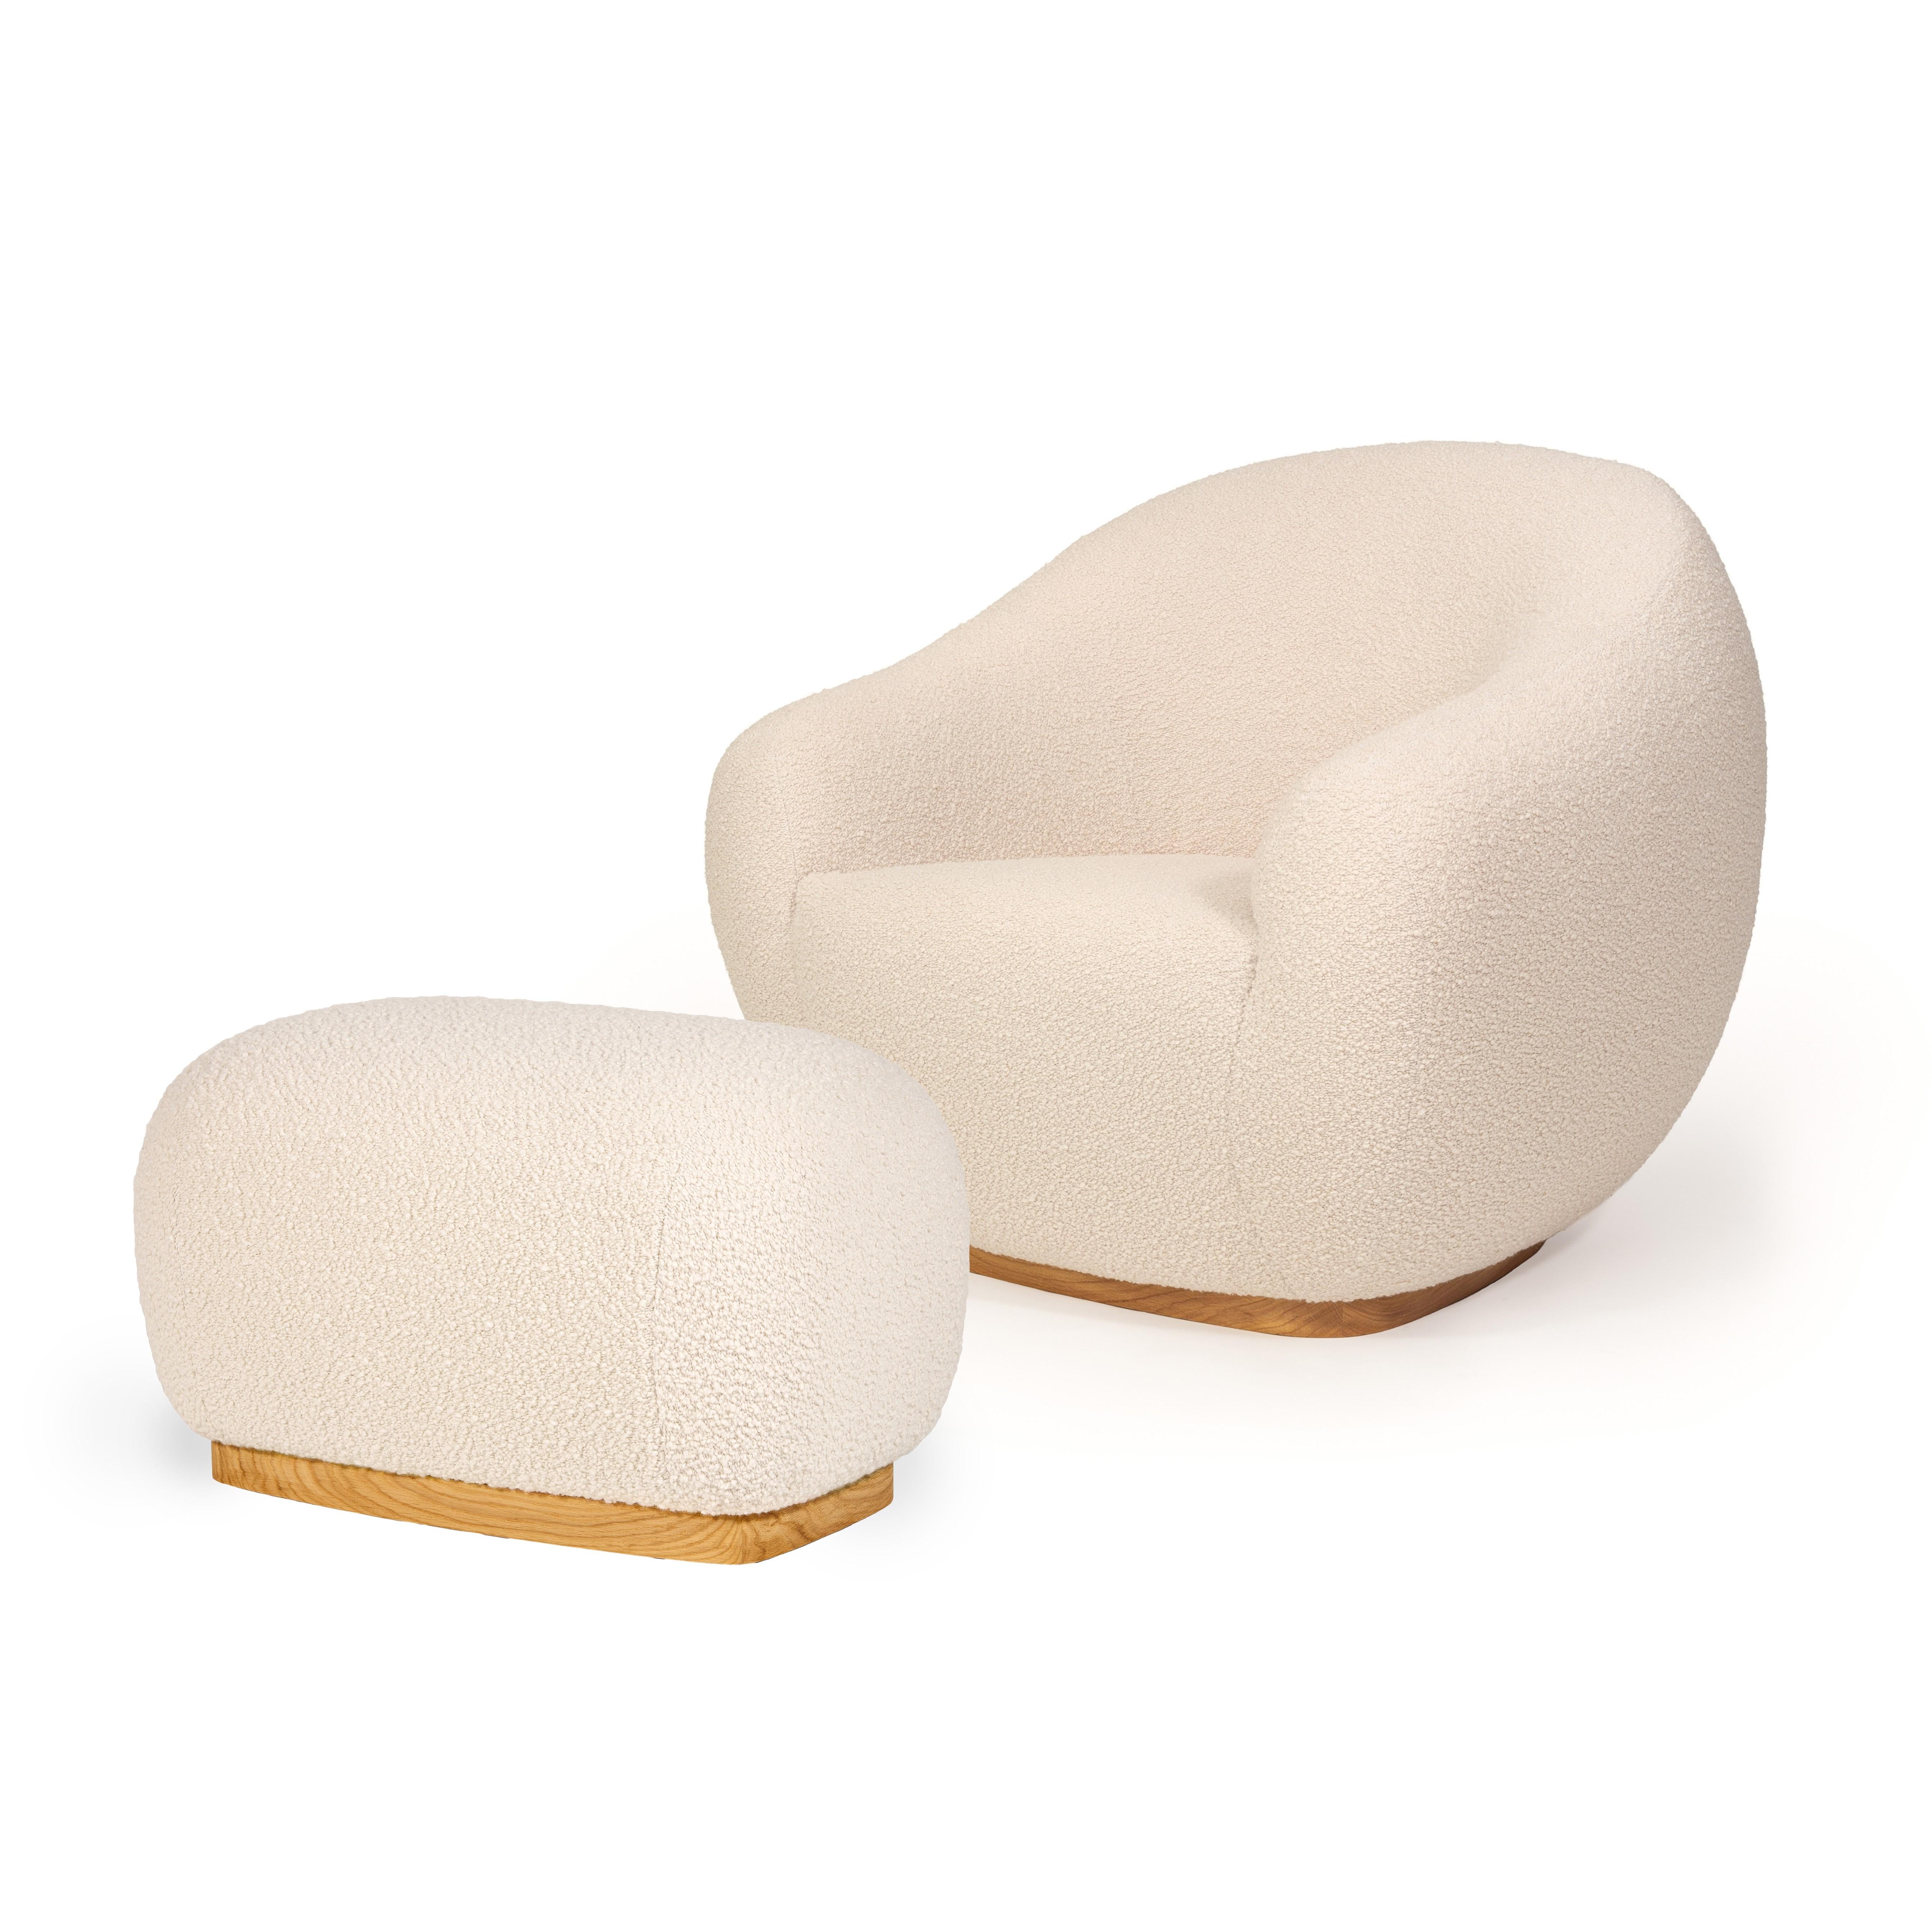 Gold Design Award Winner for Furniture Design Category at the A’Design Award Competition 2021-2022

Both the Niemeyer II armchair and stool is named after the Brazilian Architect Oscar Niemeyer whose Architecture was spread like sculptural poetry in